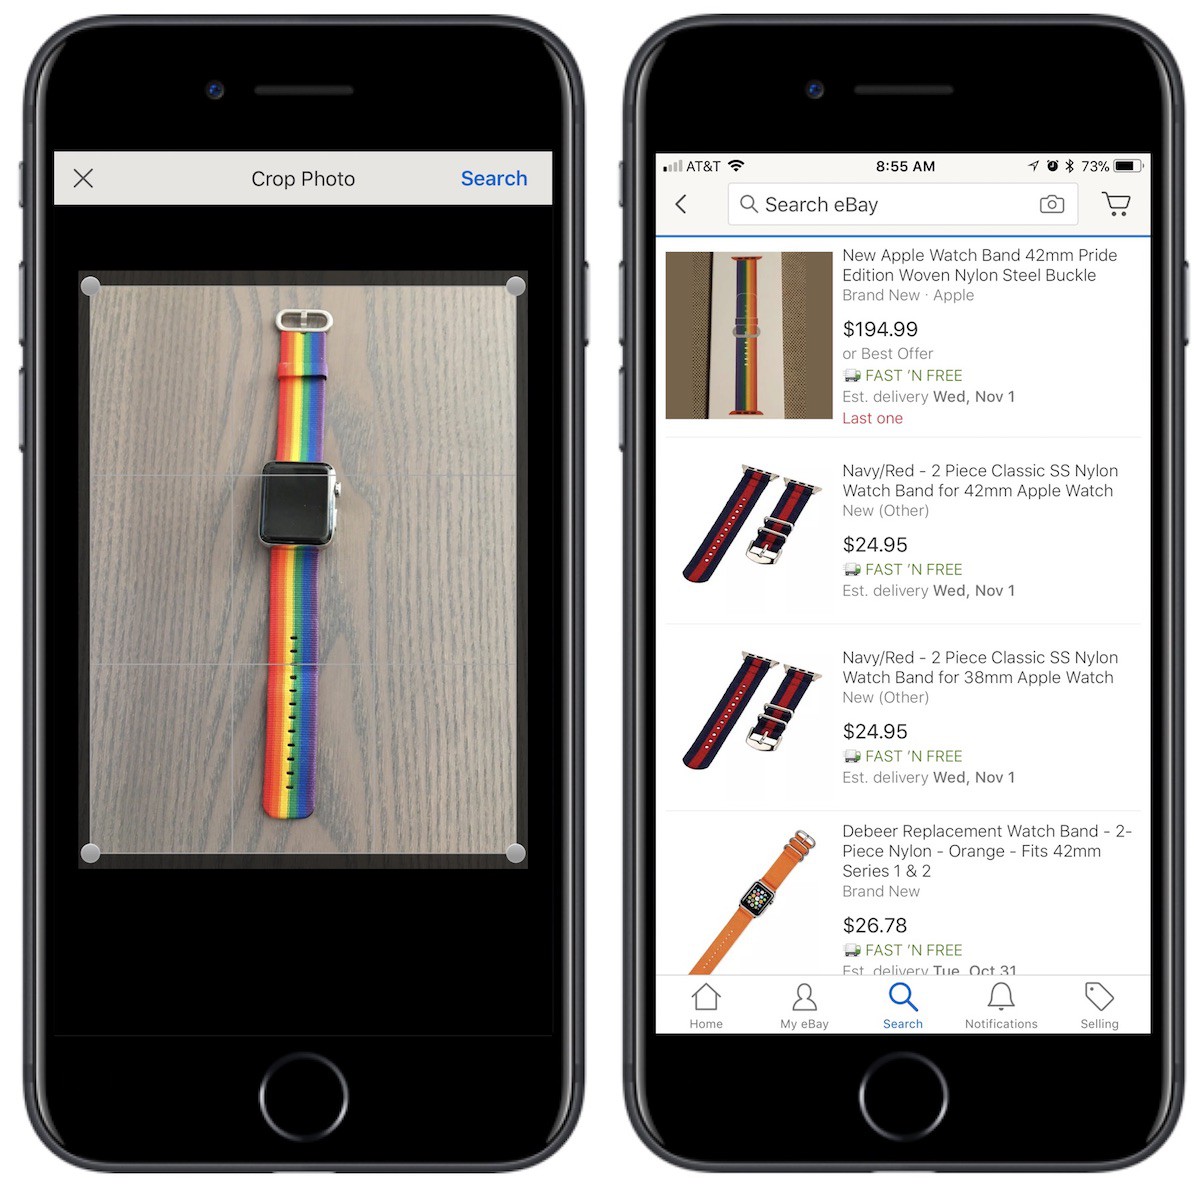 eBay's New Image Search Feature is Now Live Within iOS App MacRumors